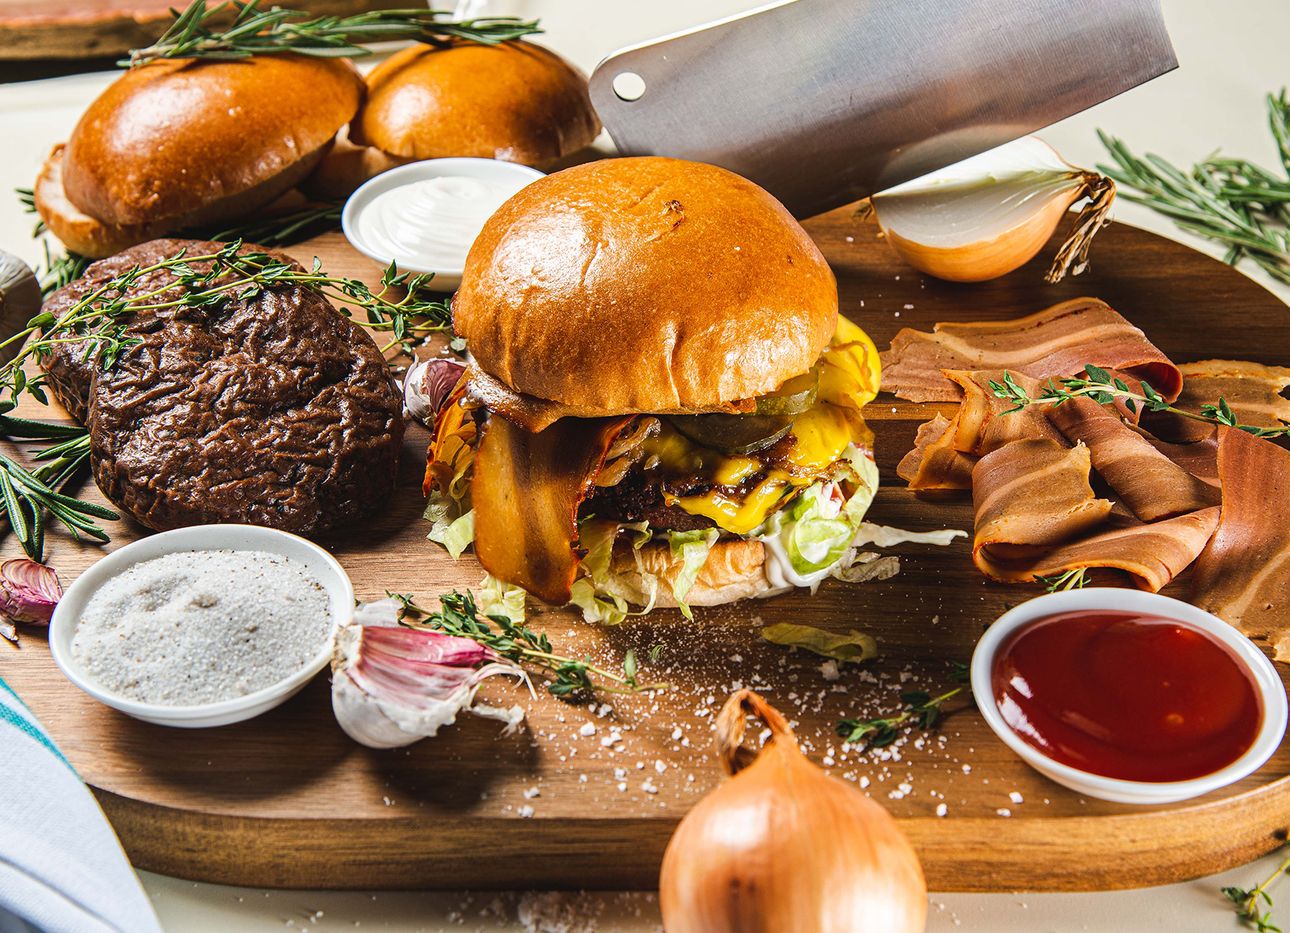 A carving board with vegan burgers and bacon, onions, a cleaver, herbs, and condiments.